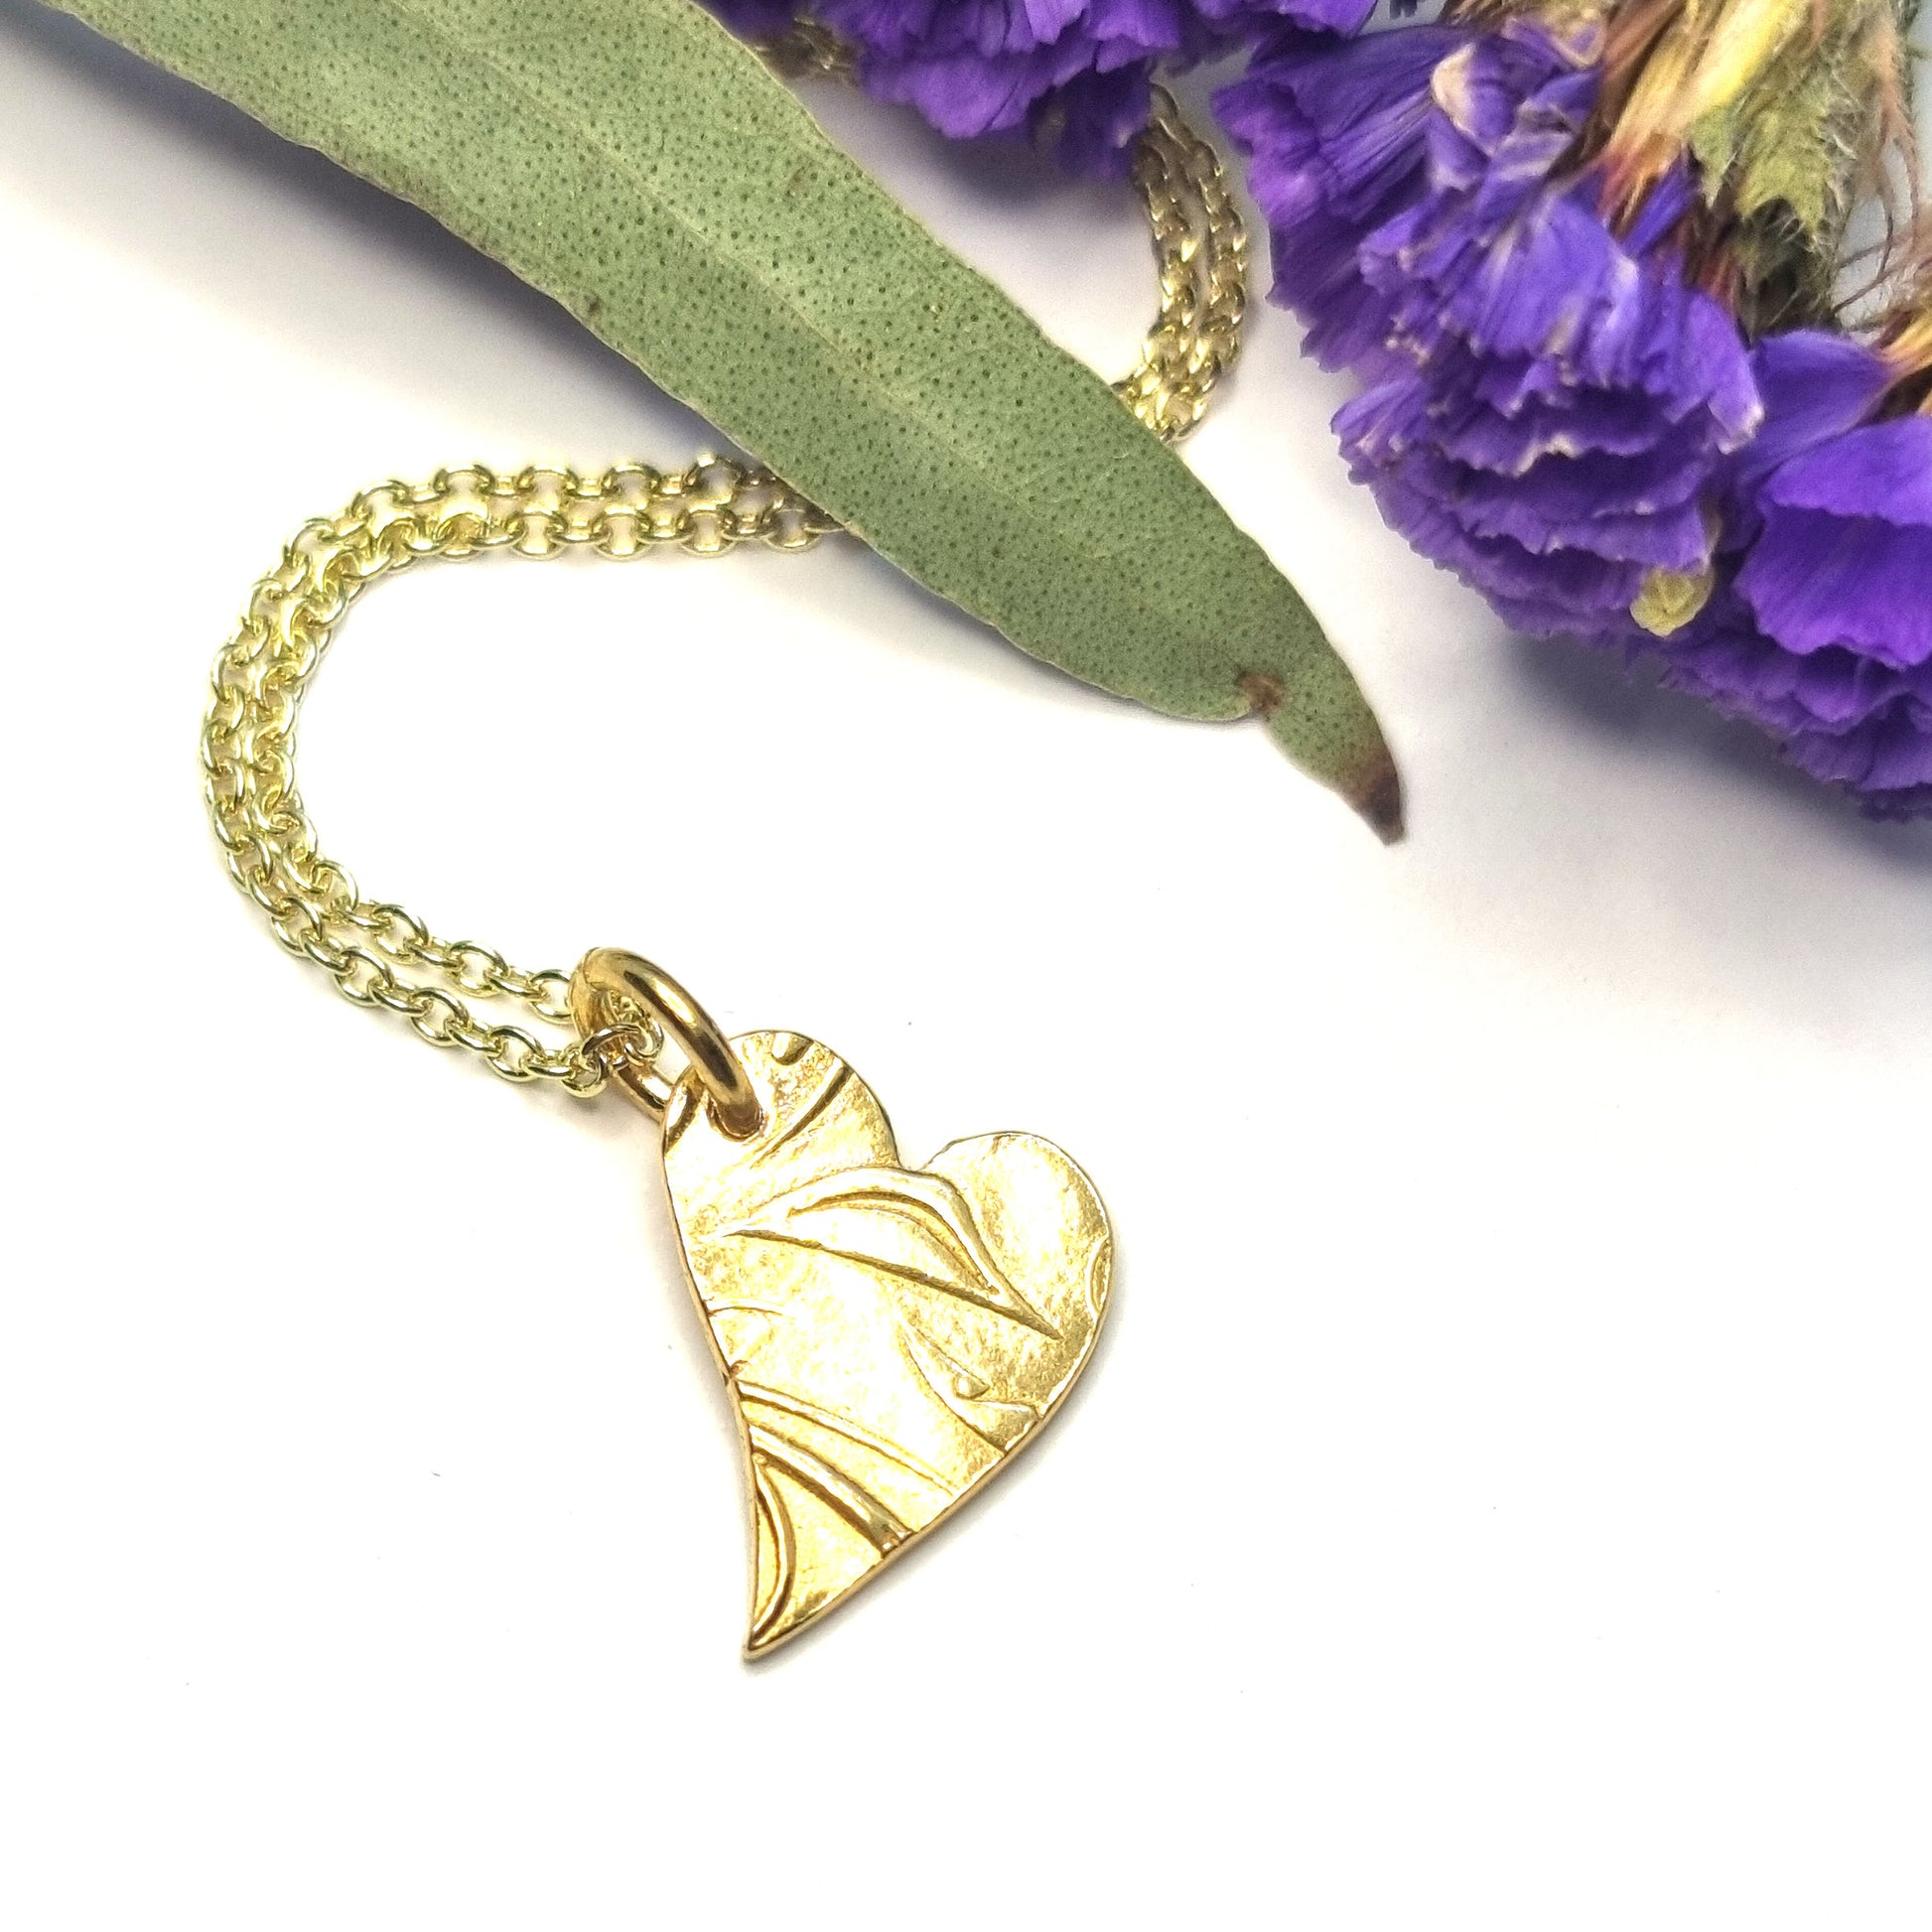 Yellow gold vermeil asymmetrical heart pendant with a leaf & vine design on a yellow gold vermeil chain. Pictured with flowers.